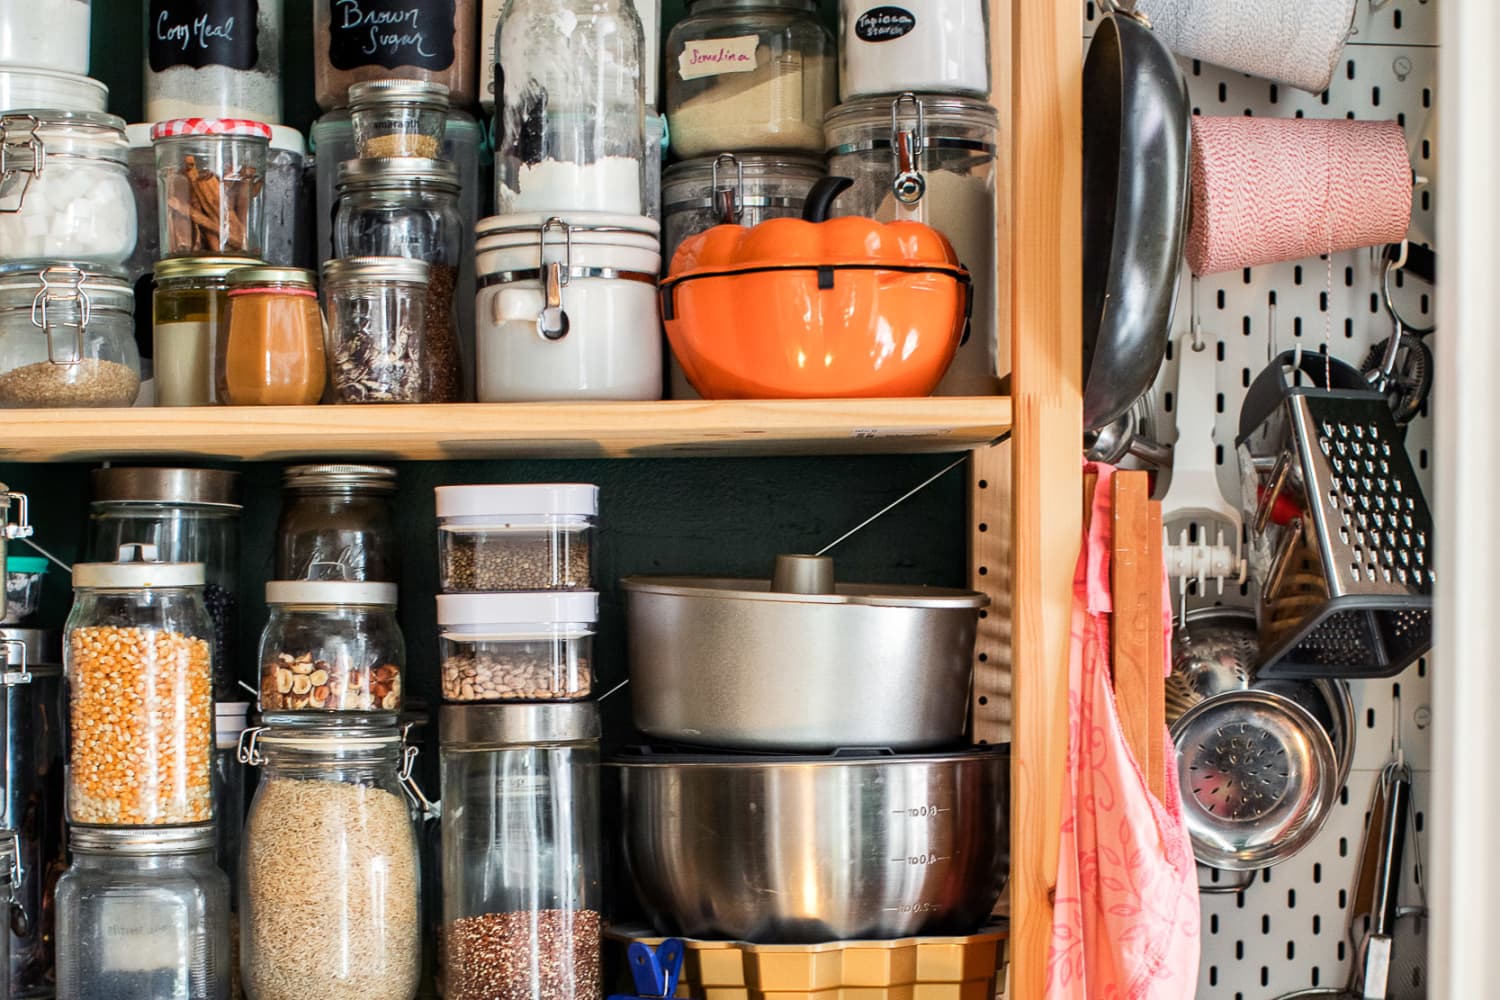 This Restaurant Food Storage Solution Does Wonders in My Home